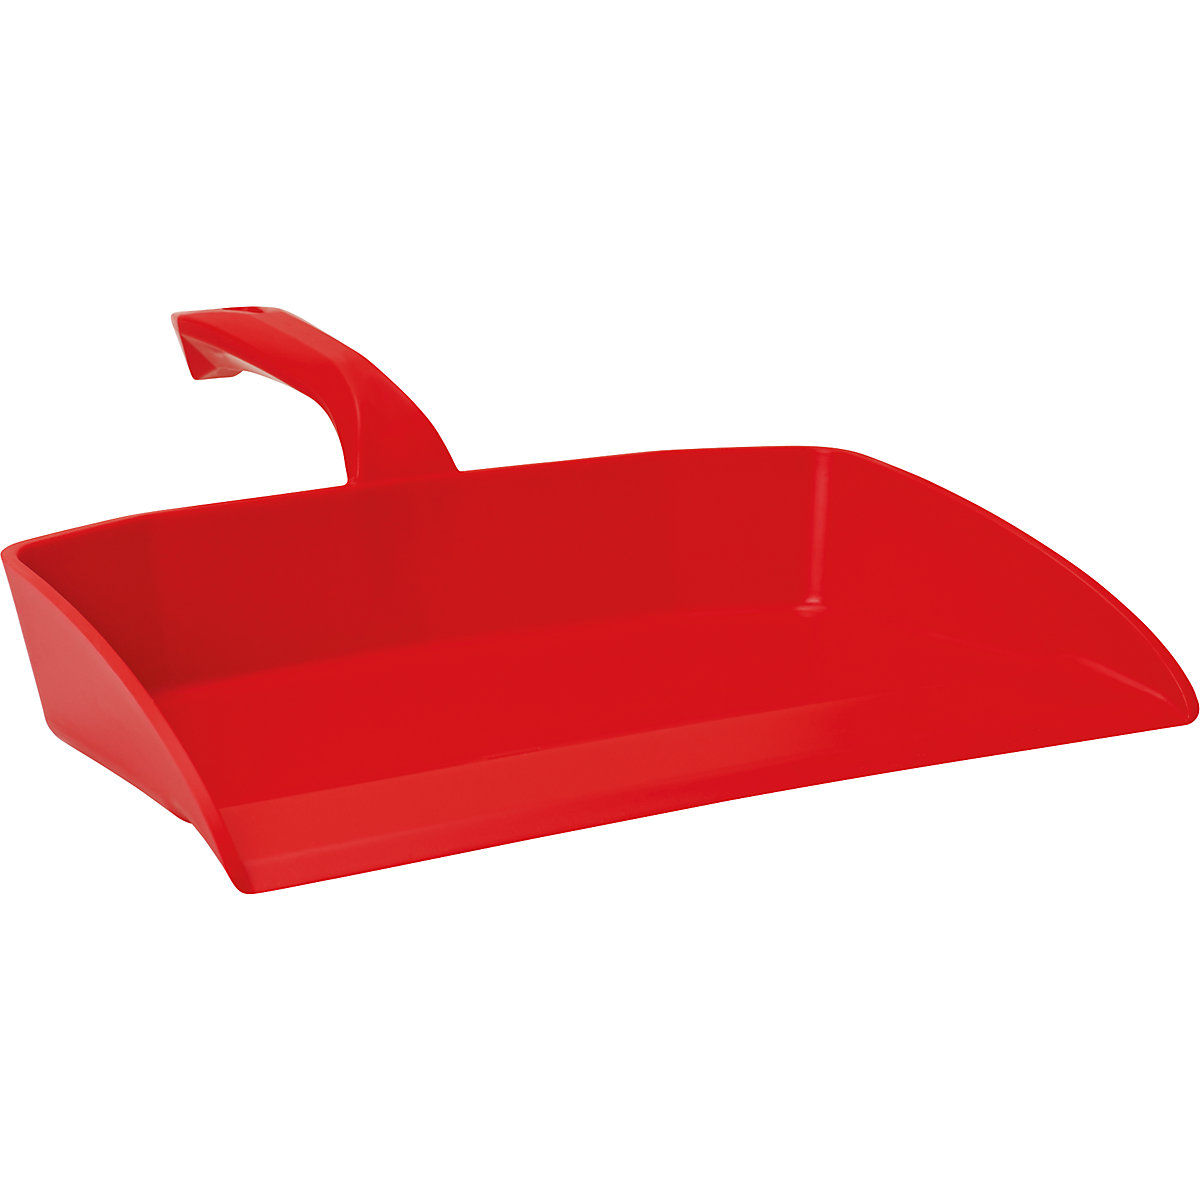 Vikan – Dustpan, overall length 330 mm, pack of 10, red